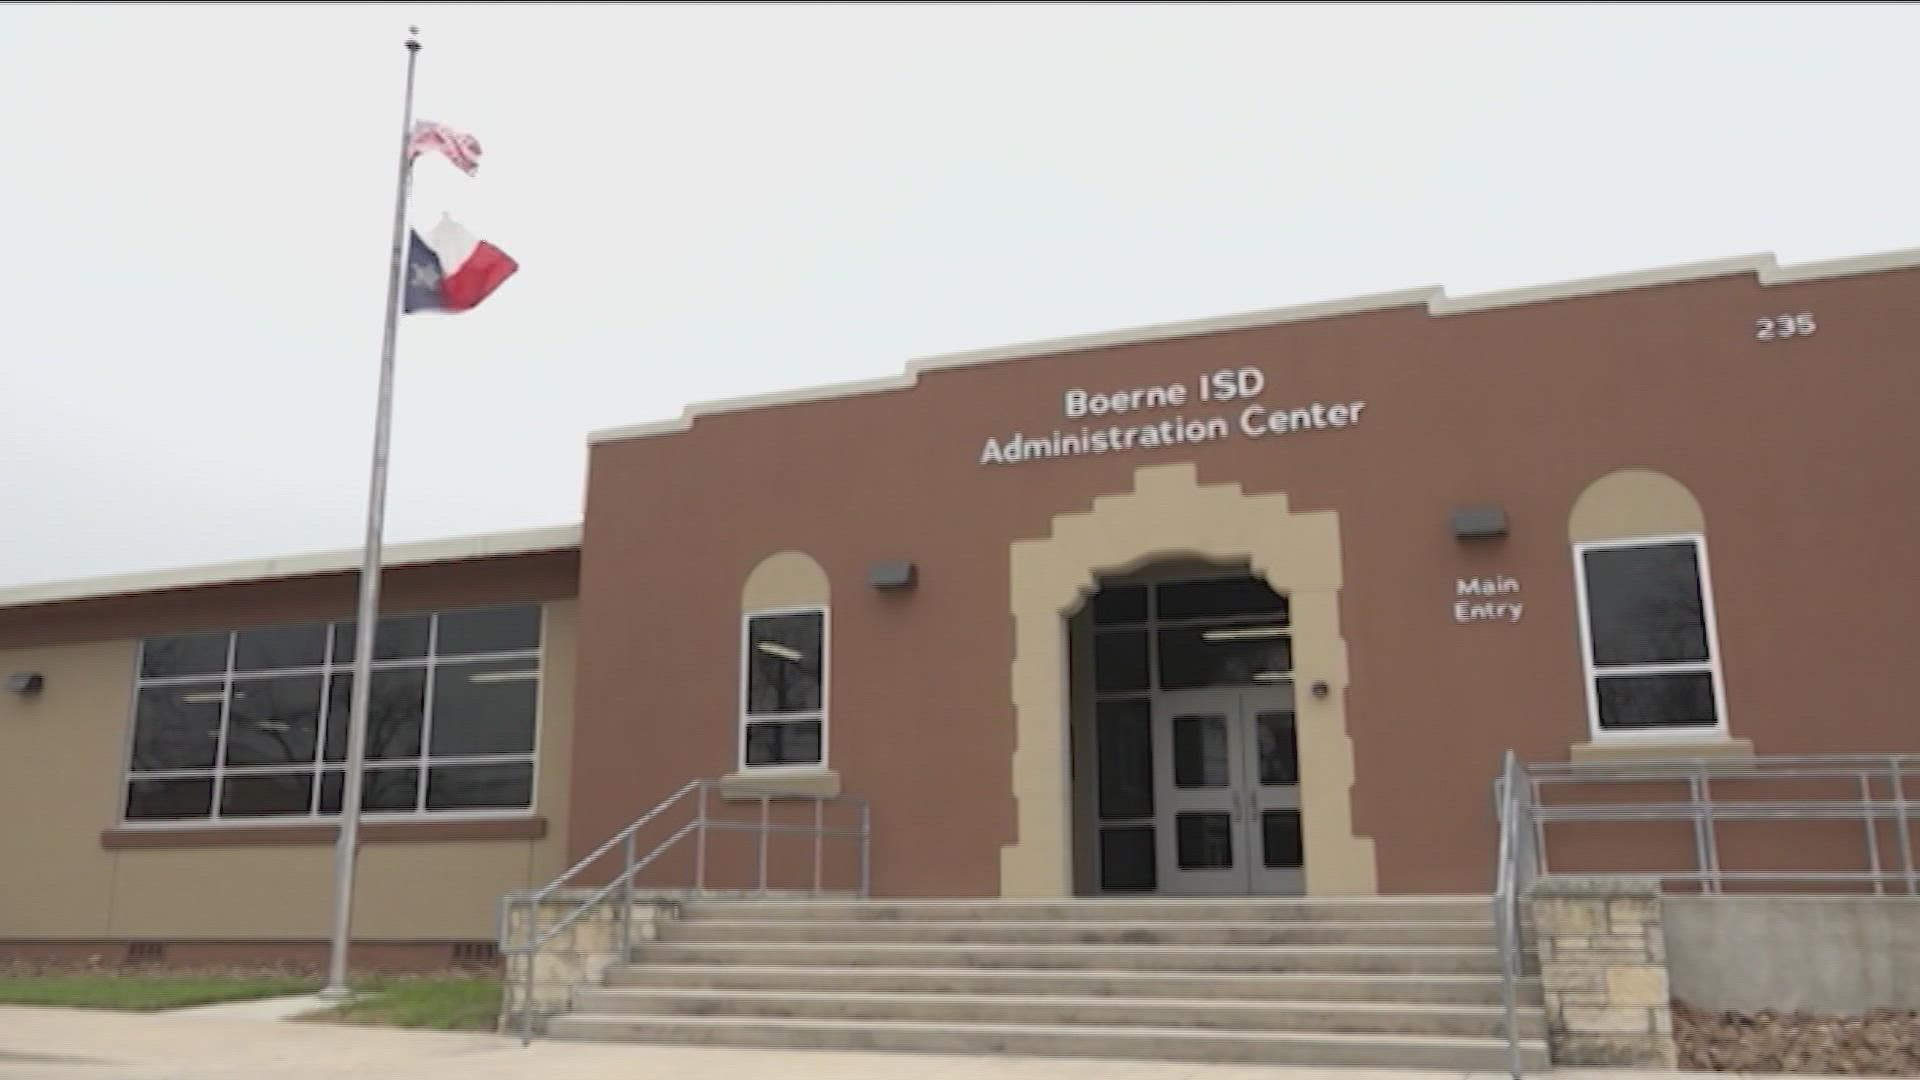 Boerne ISD is increasing its daily rate beginning Tuesday, Jan. 25, as part of an emergency effort.